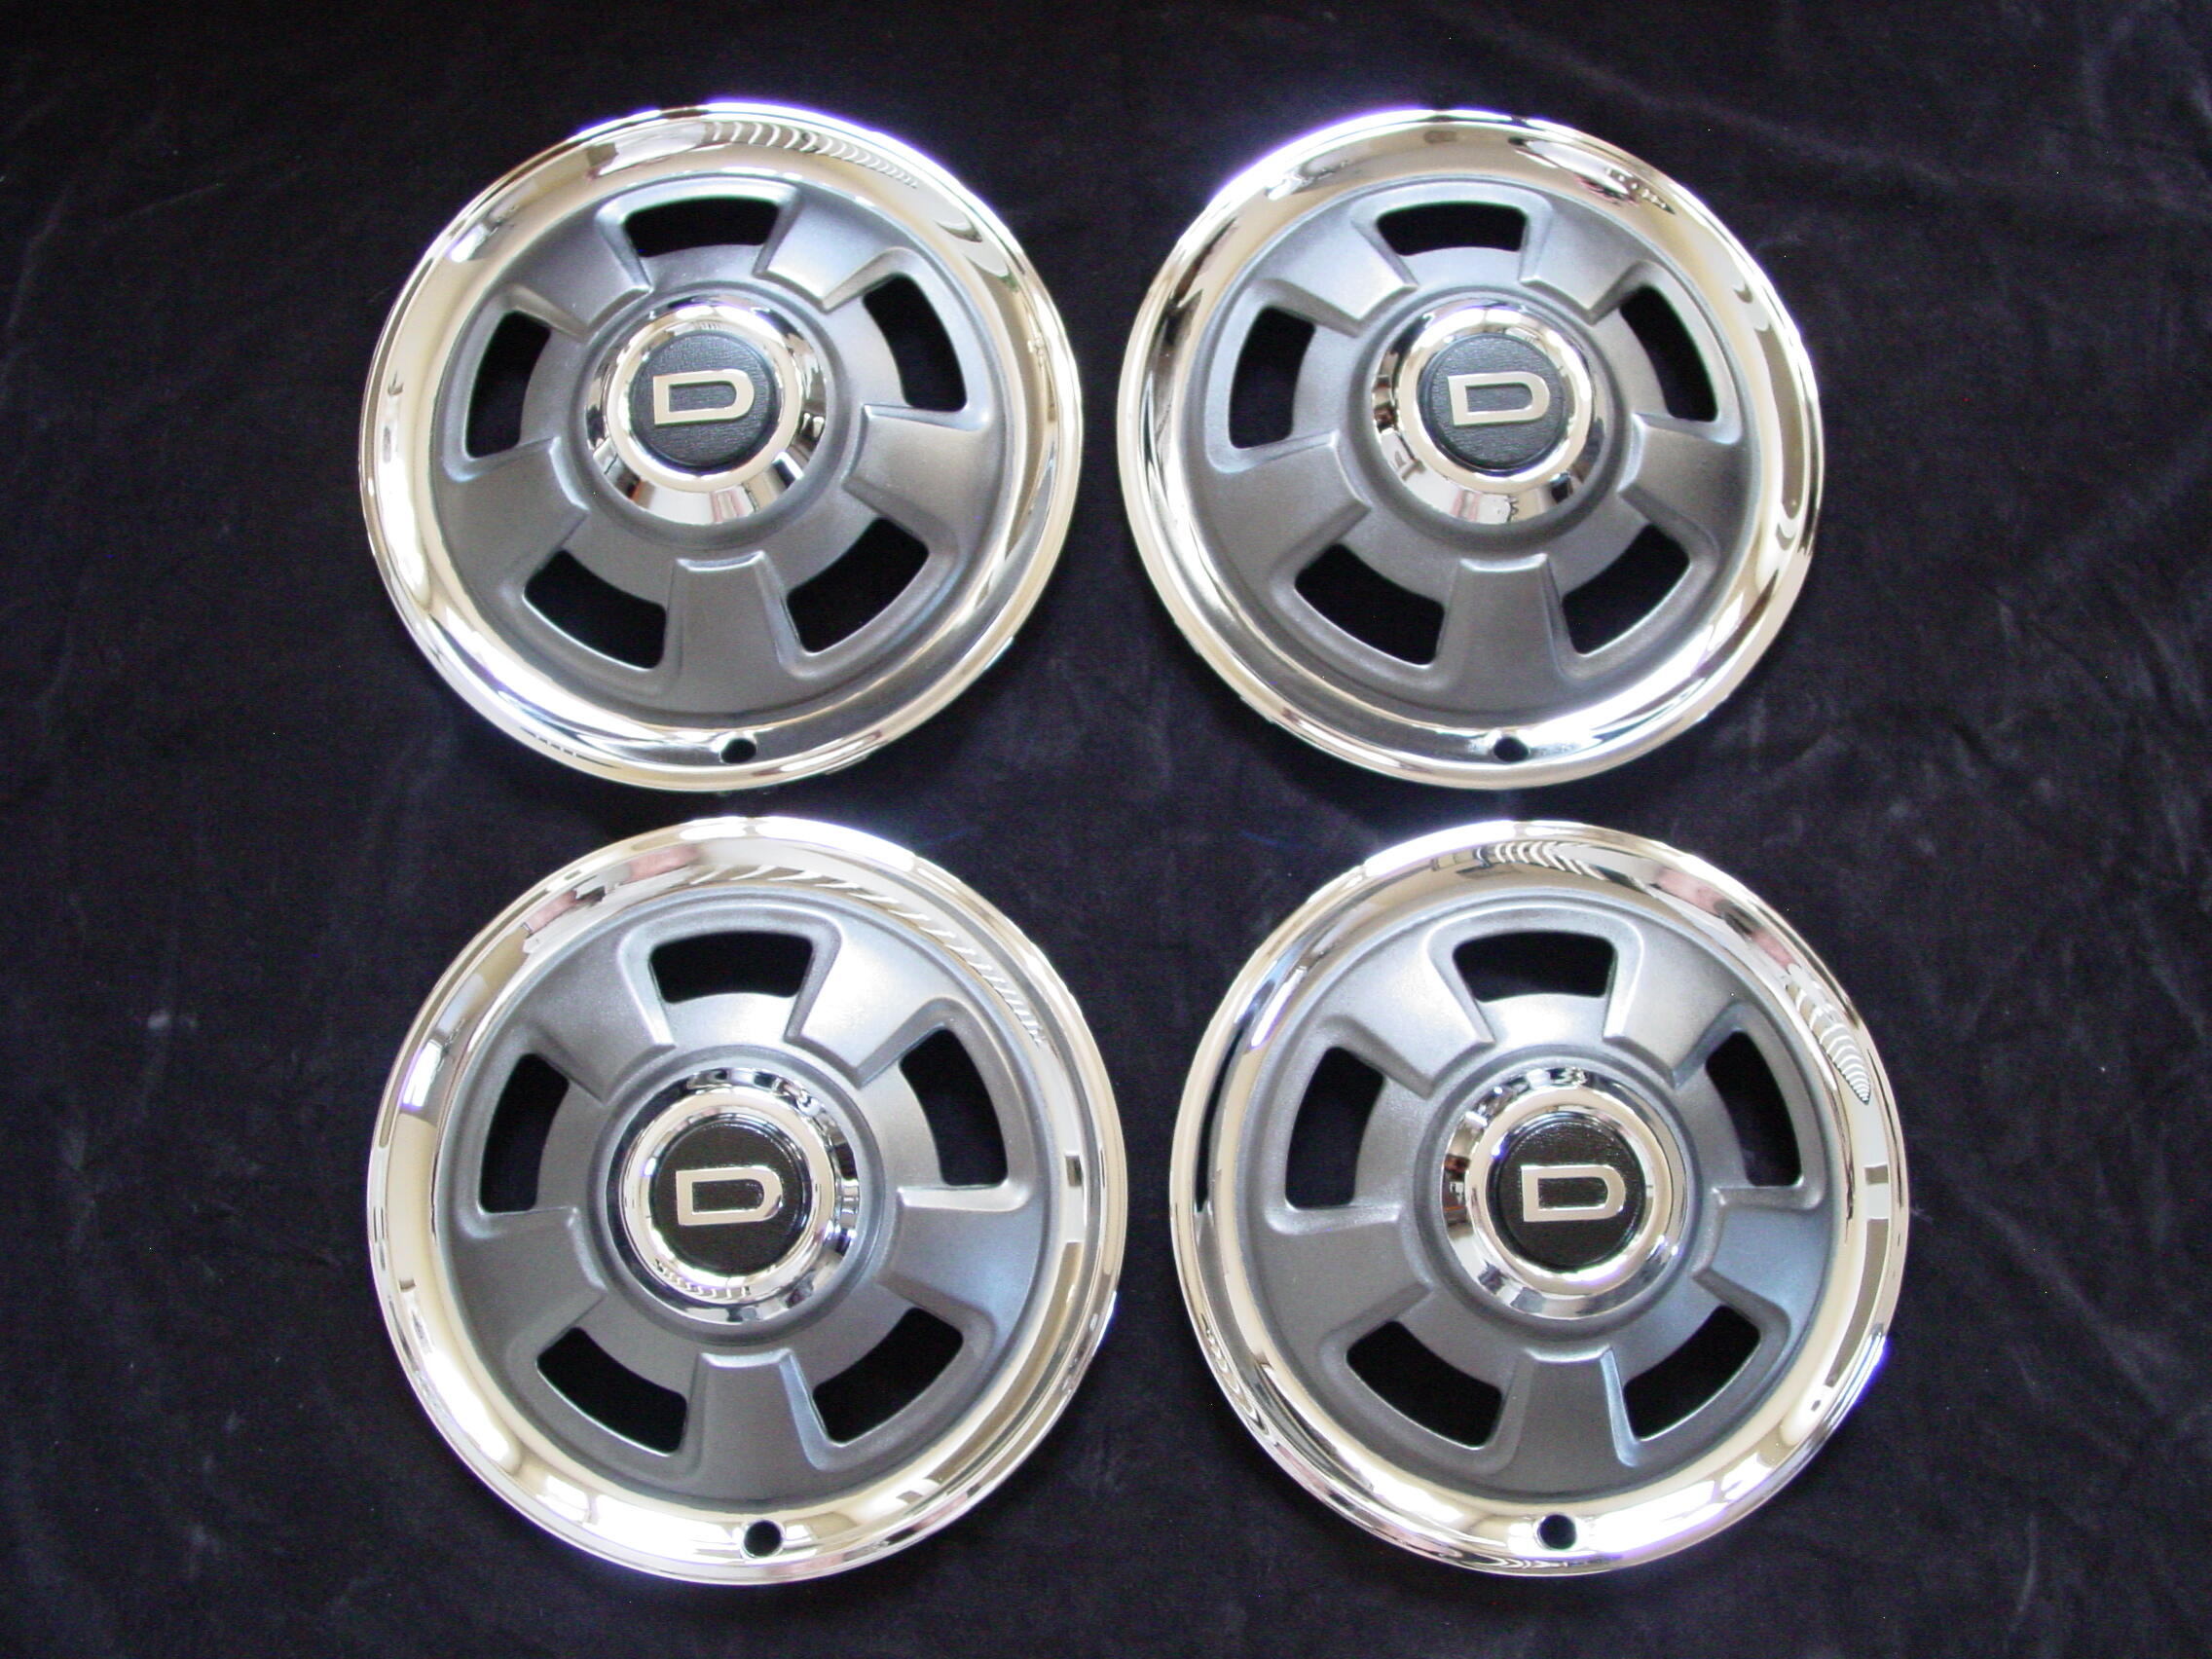 Set of 4 1970-1971 Datsun 240Z "D" Hubcaps Professionally Rechromed & Repainted!